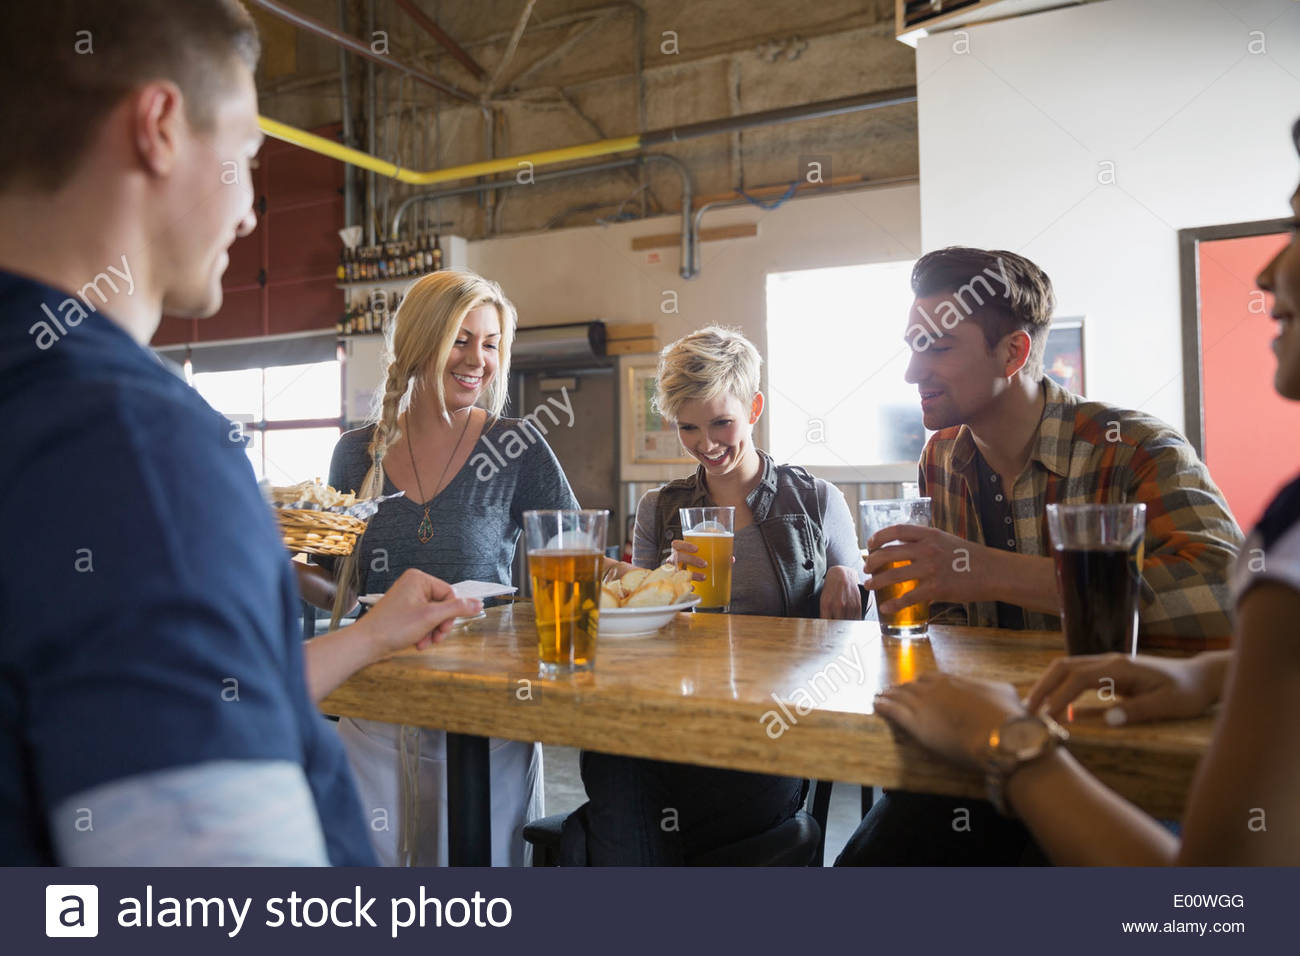 Brewery waitress serving food and beer to friends Stock Photo